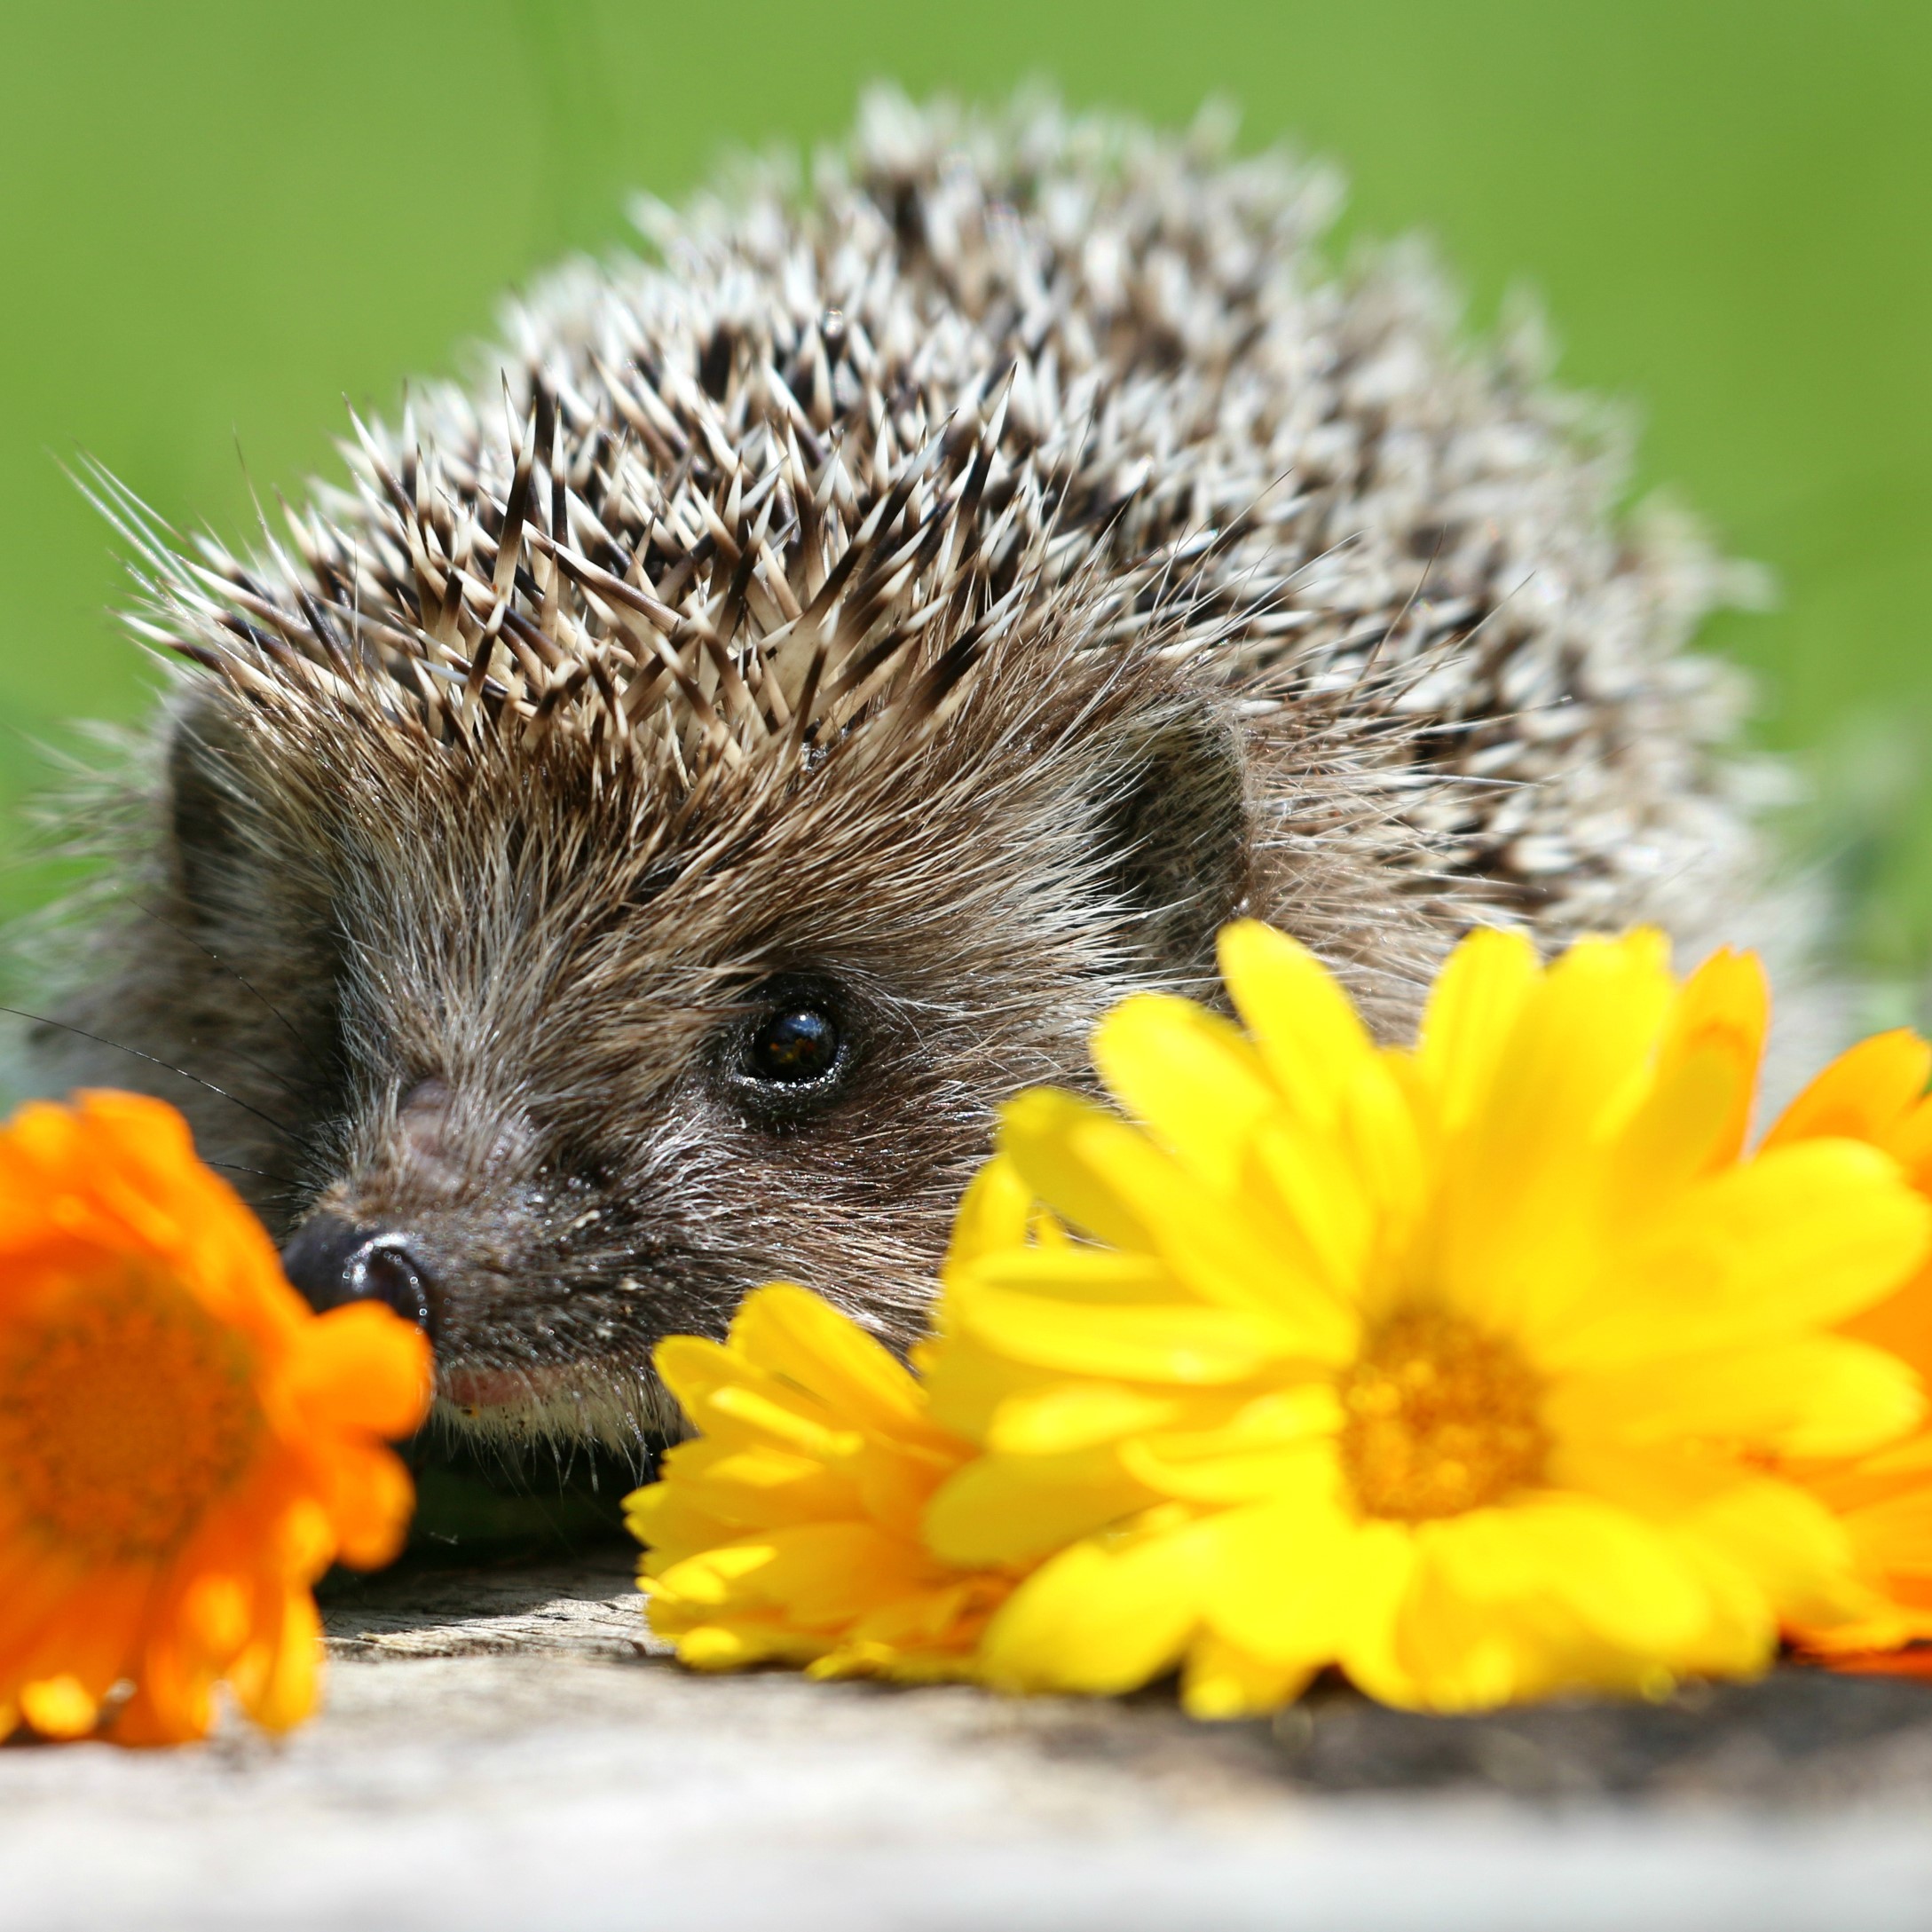 Love our hedgehogs